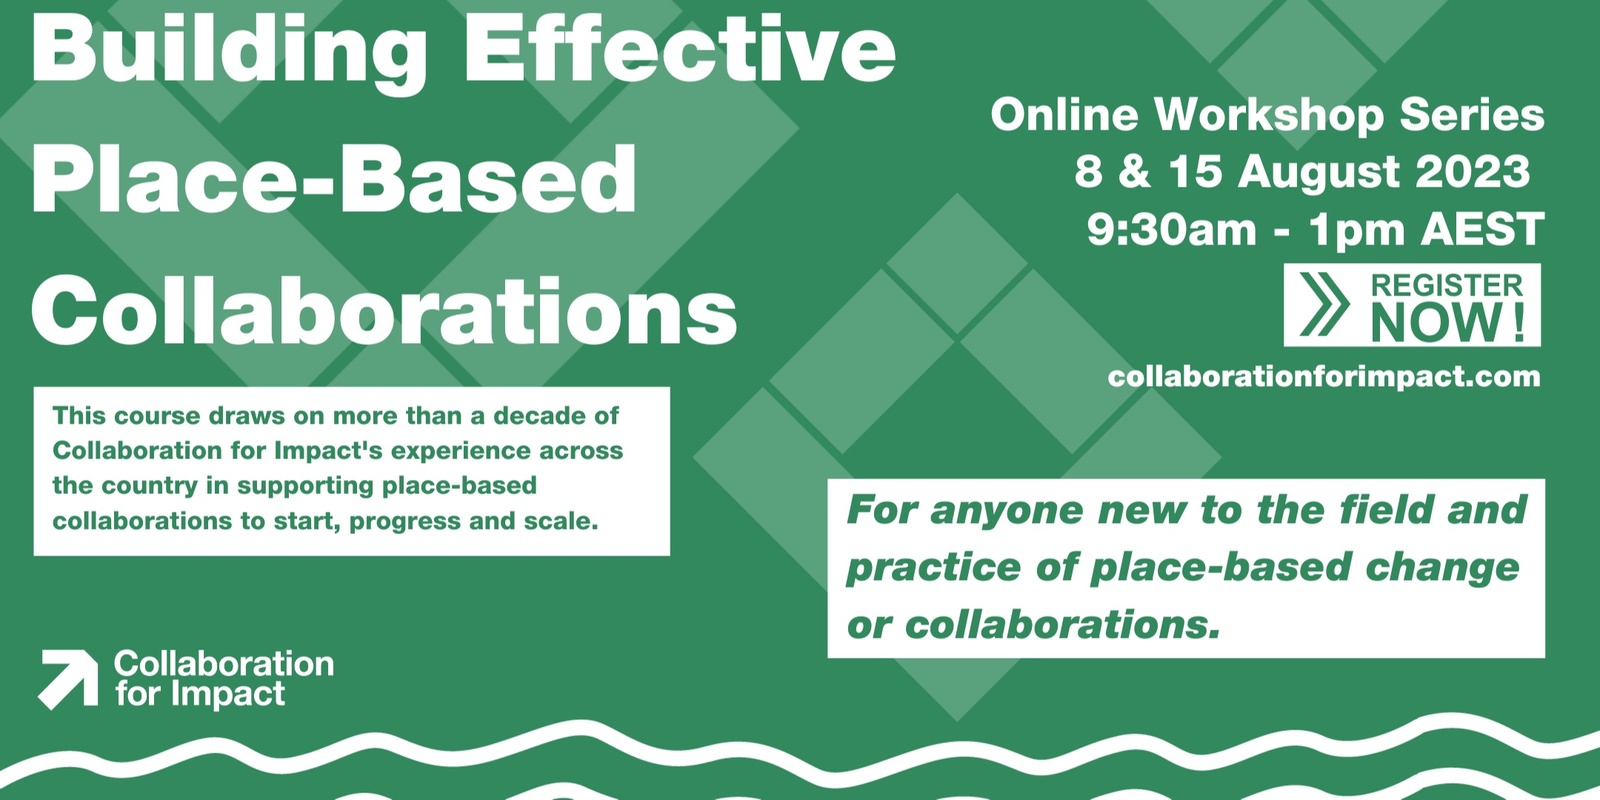 Building Effective Place-Based Collaborations